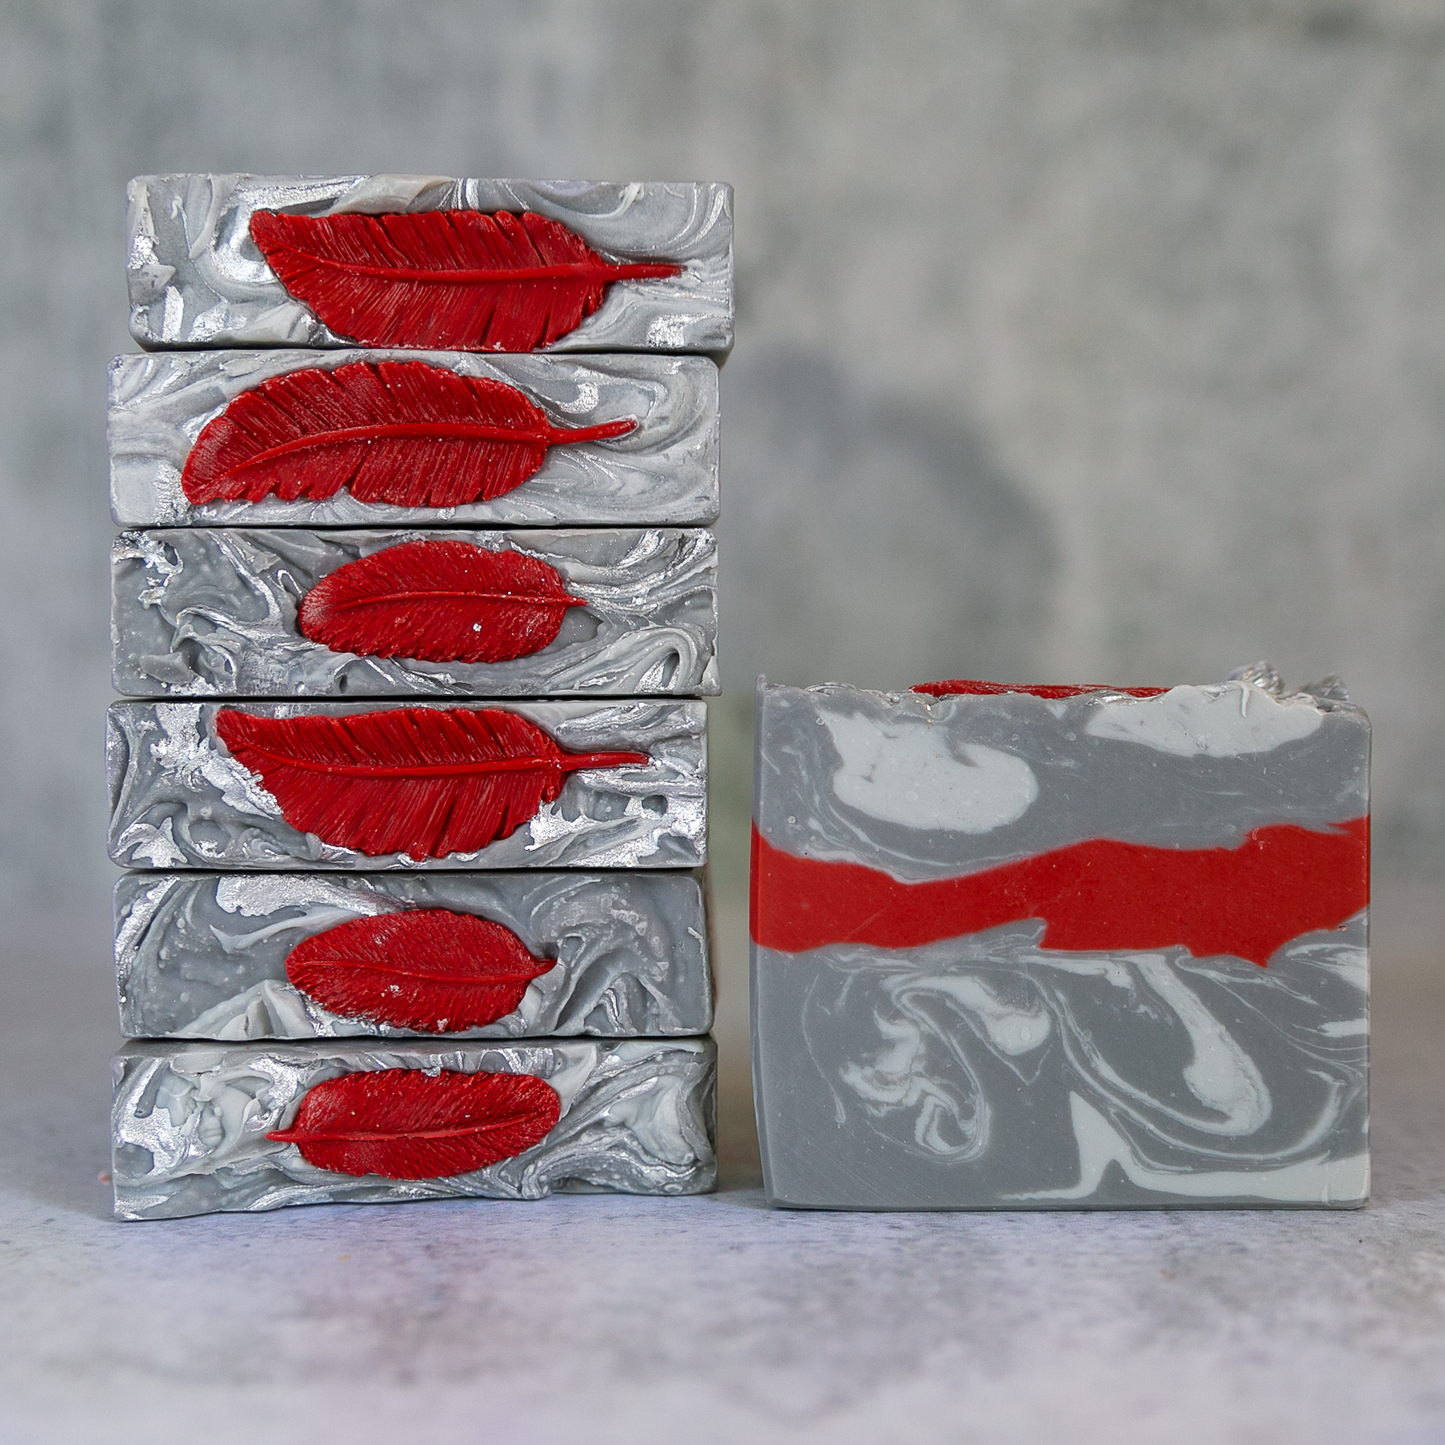 Knight in Shining Armour Artisan Soap